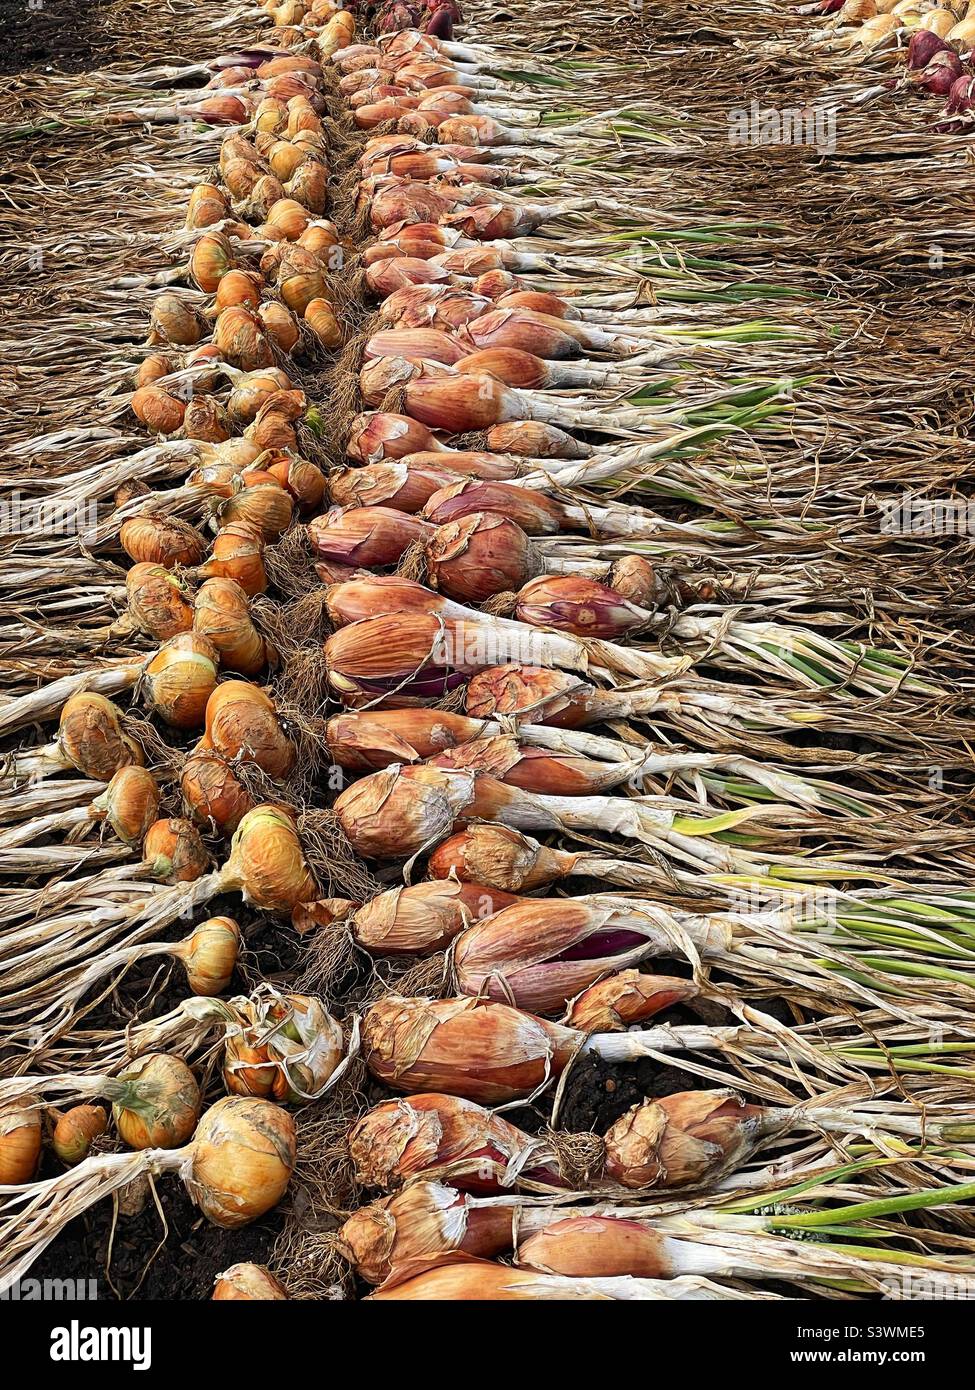 Onions laid out to dry after harvesting. Giant Stuttgart (left) and Long Red Florence varieties. Stock Photo